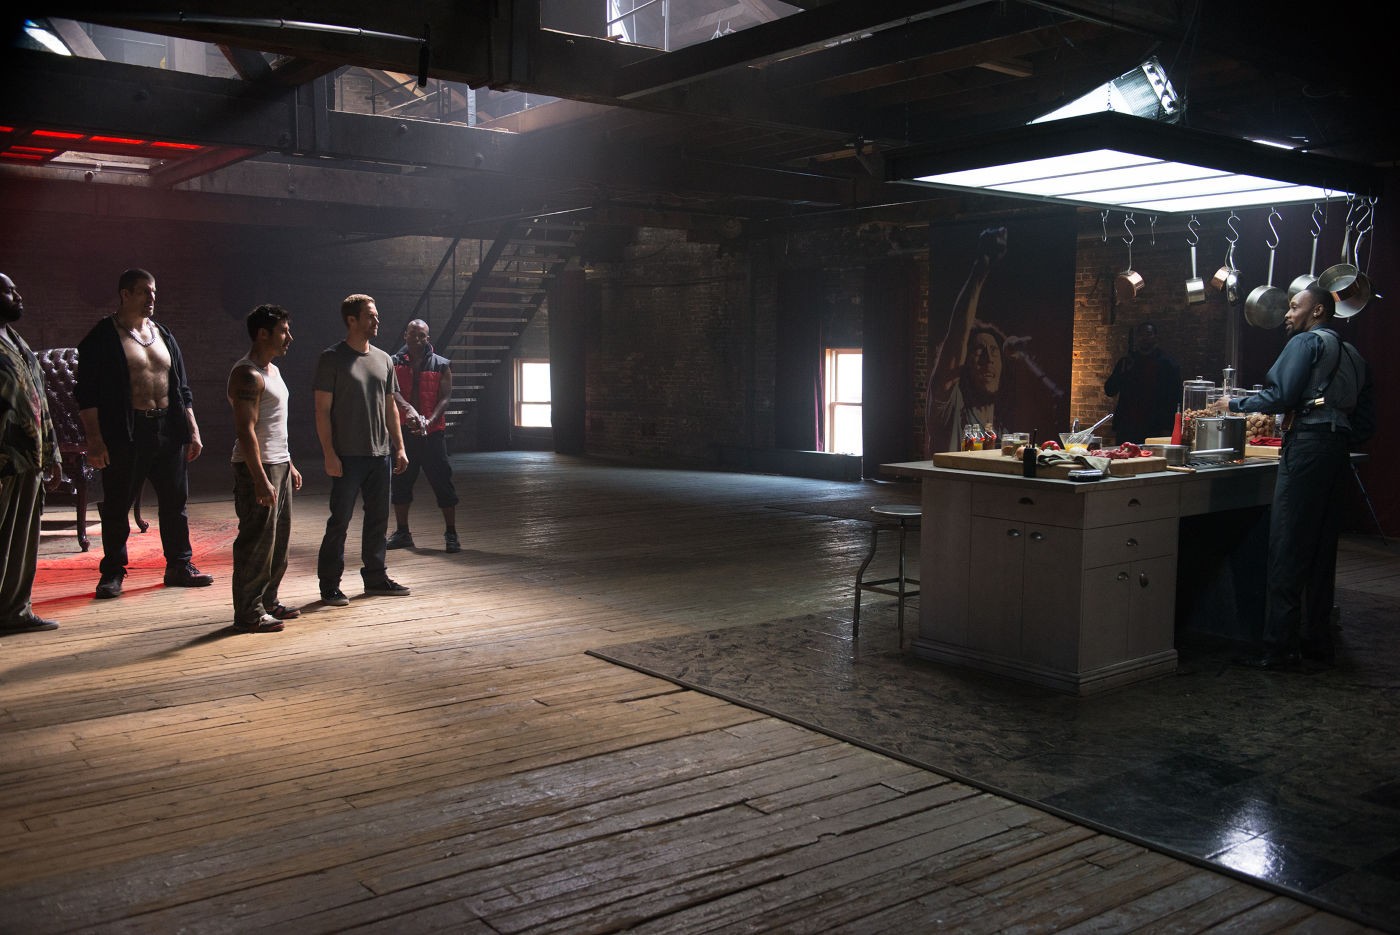 Gouchy Boy, David Belle, Paul Walker and RZA in Relativity Media's Brick Mansions (2014)